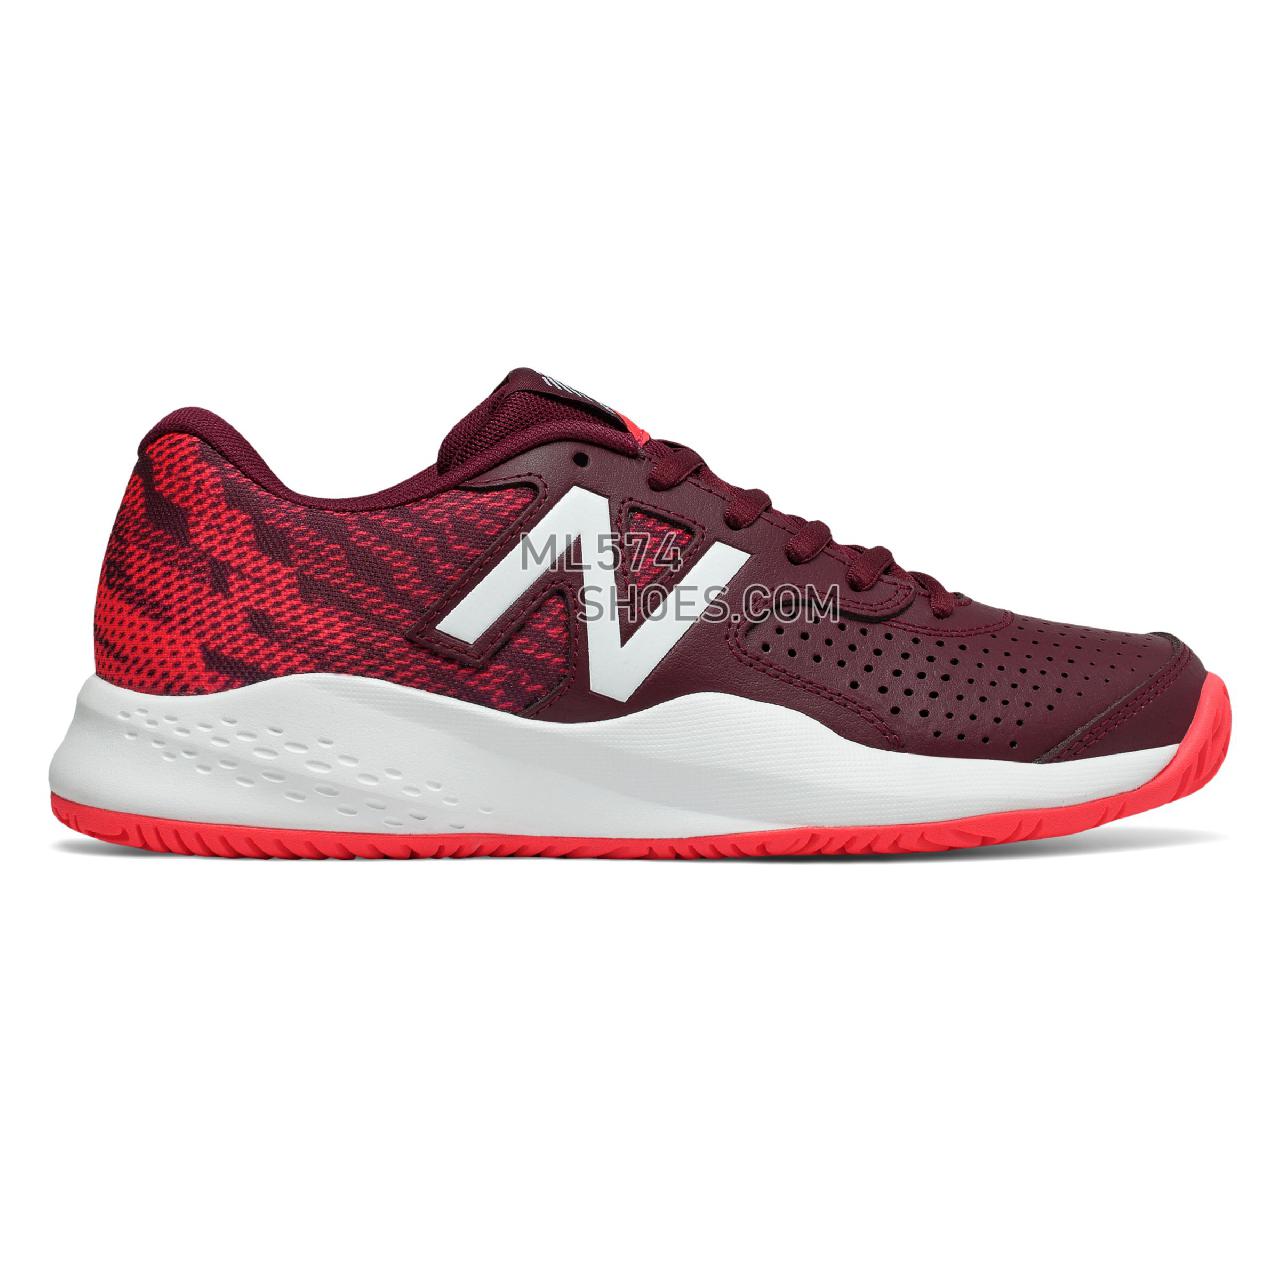 New Balance 696v3 - Women's 696 - Tennis / Court Oxblood with Vivid Coral - WCH696O3